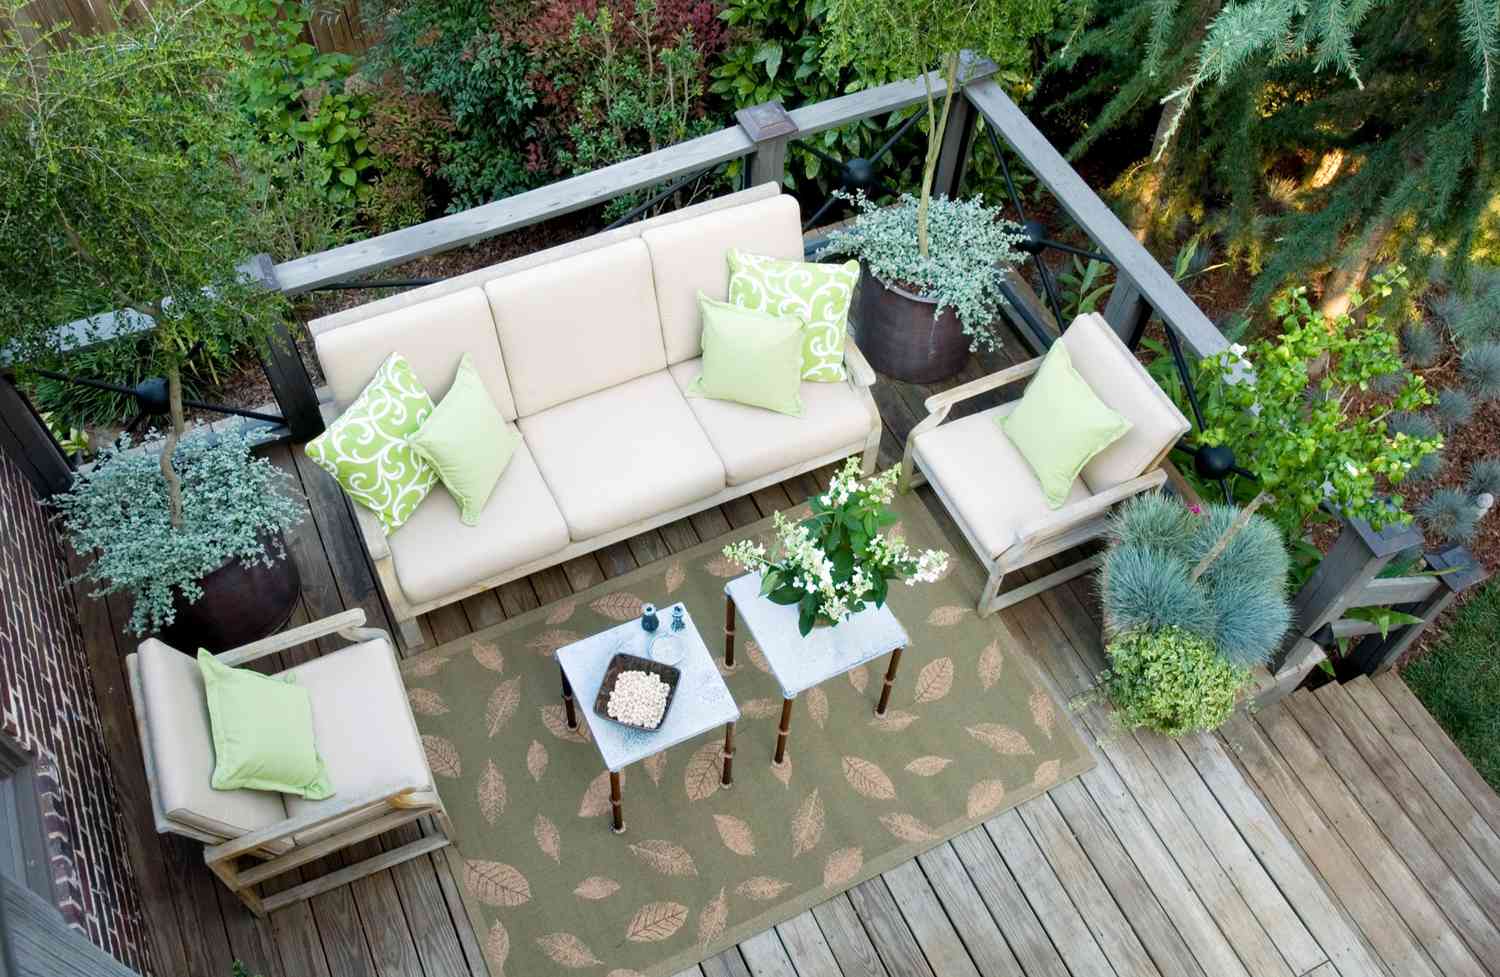 5 Things to Consider When Choosing Outdoor Furniture